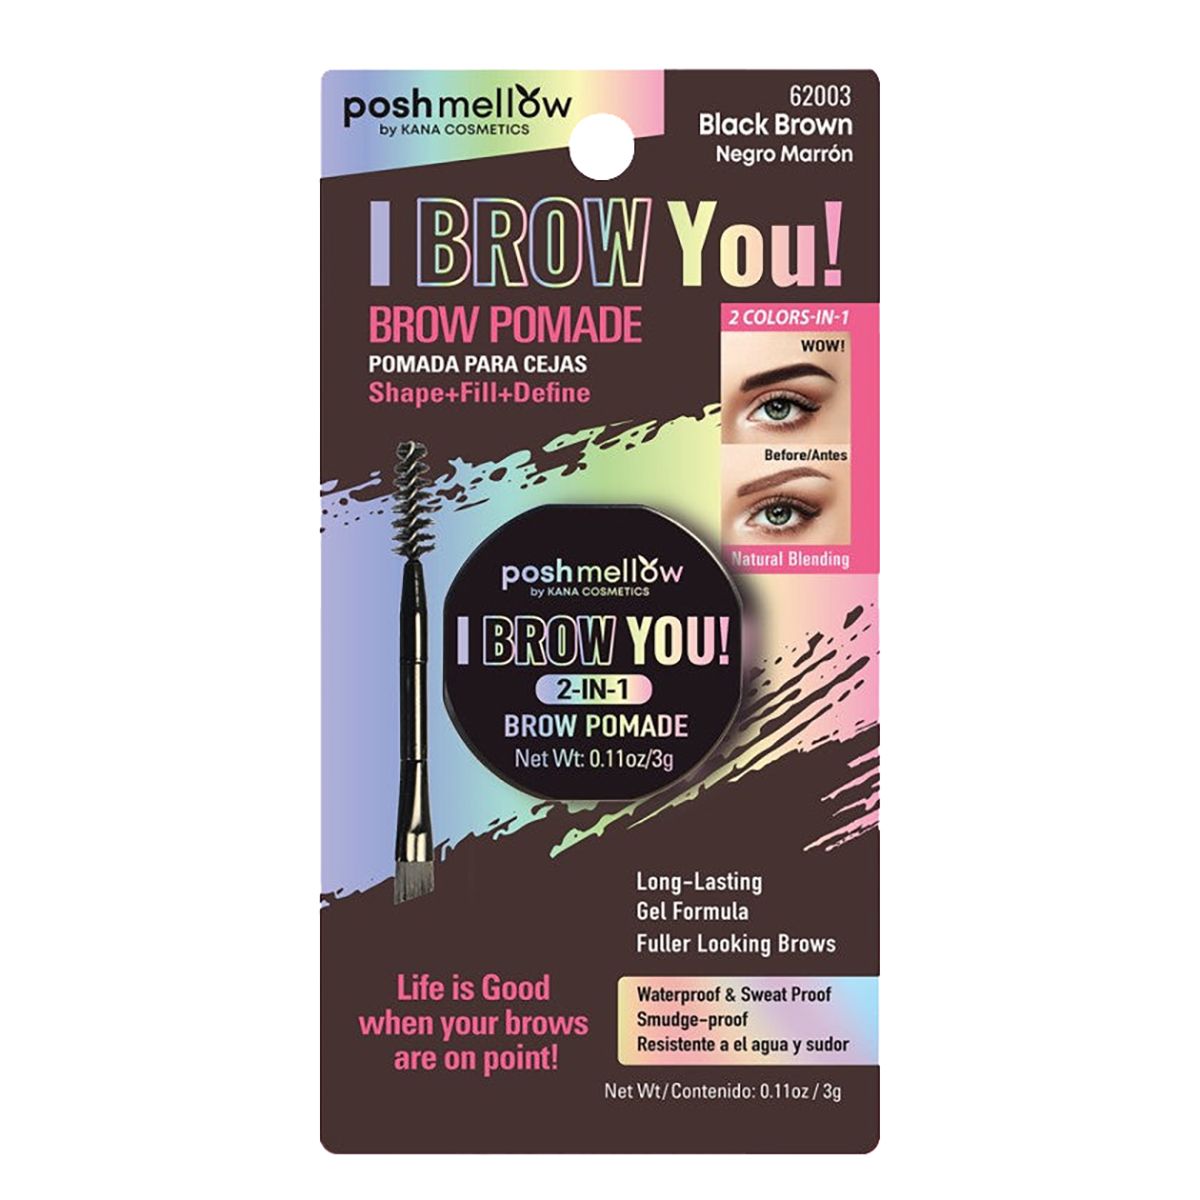 Brow Pomade 2-IN-1: I Brow You! (Black Brown)